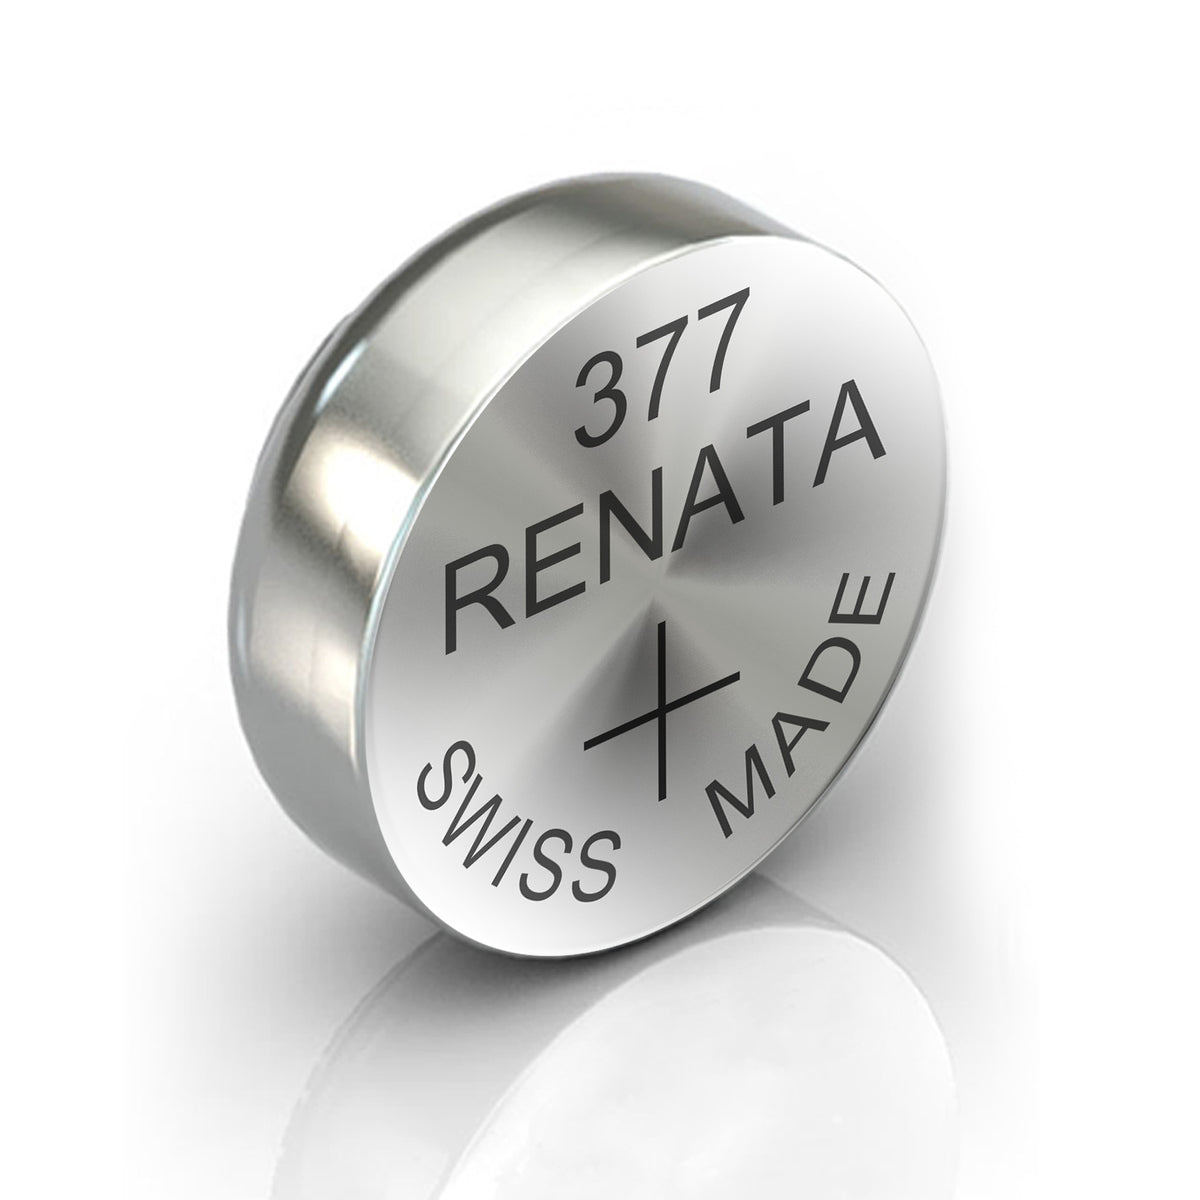 8x Renata 377 Watch Battery Silver Oxide Coin Cell V377 1.55V SR626SW  Renata We'll assist you in finding the ideal solution for your needs